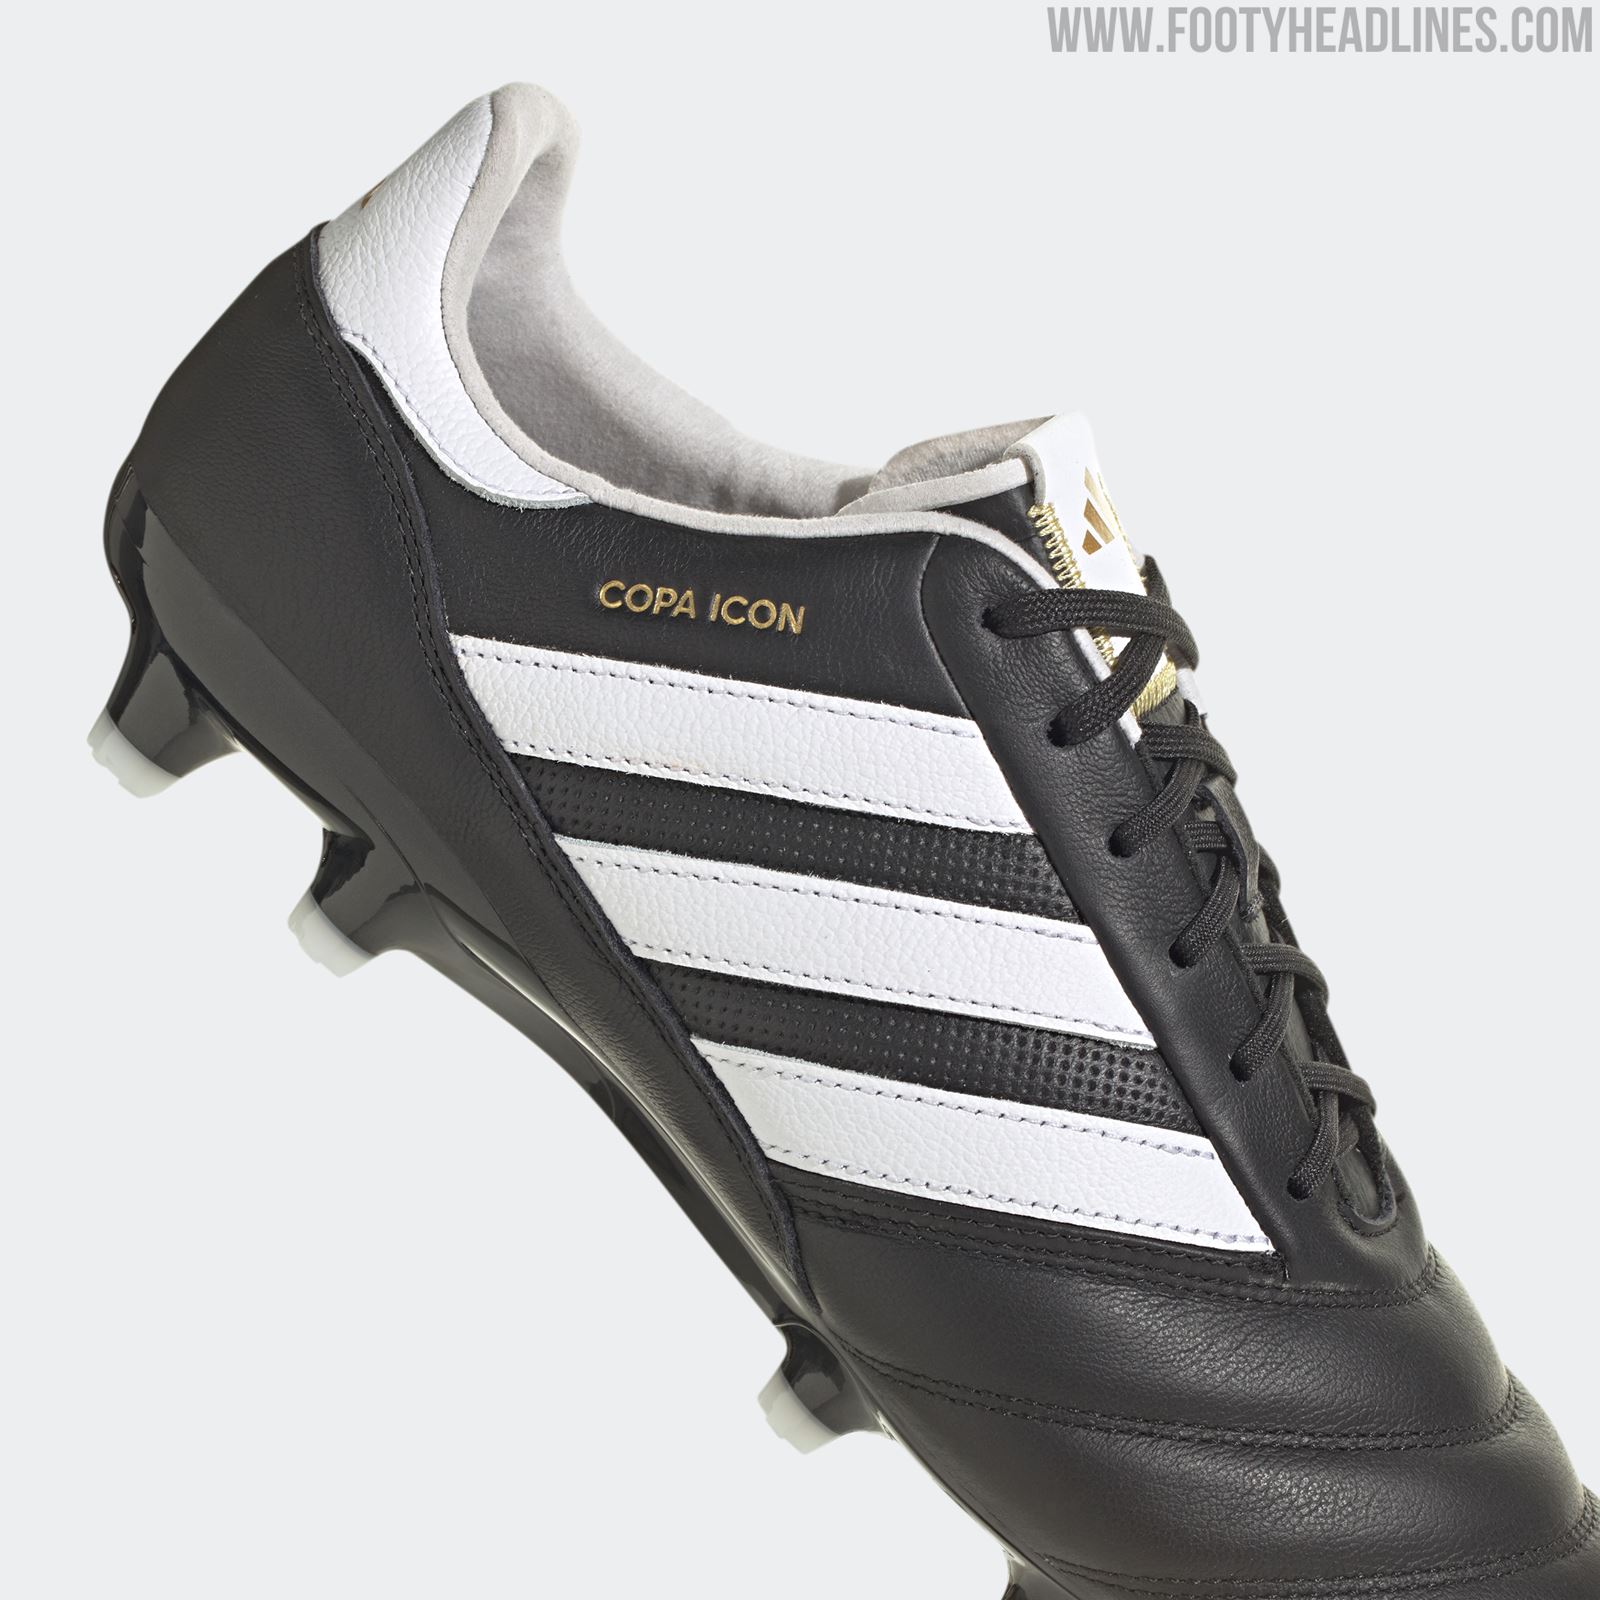 2023 Copa Mundial": All-New Adidas Copa Icon 2023 Boots Released - Footy